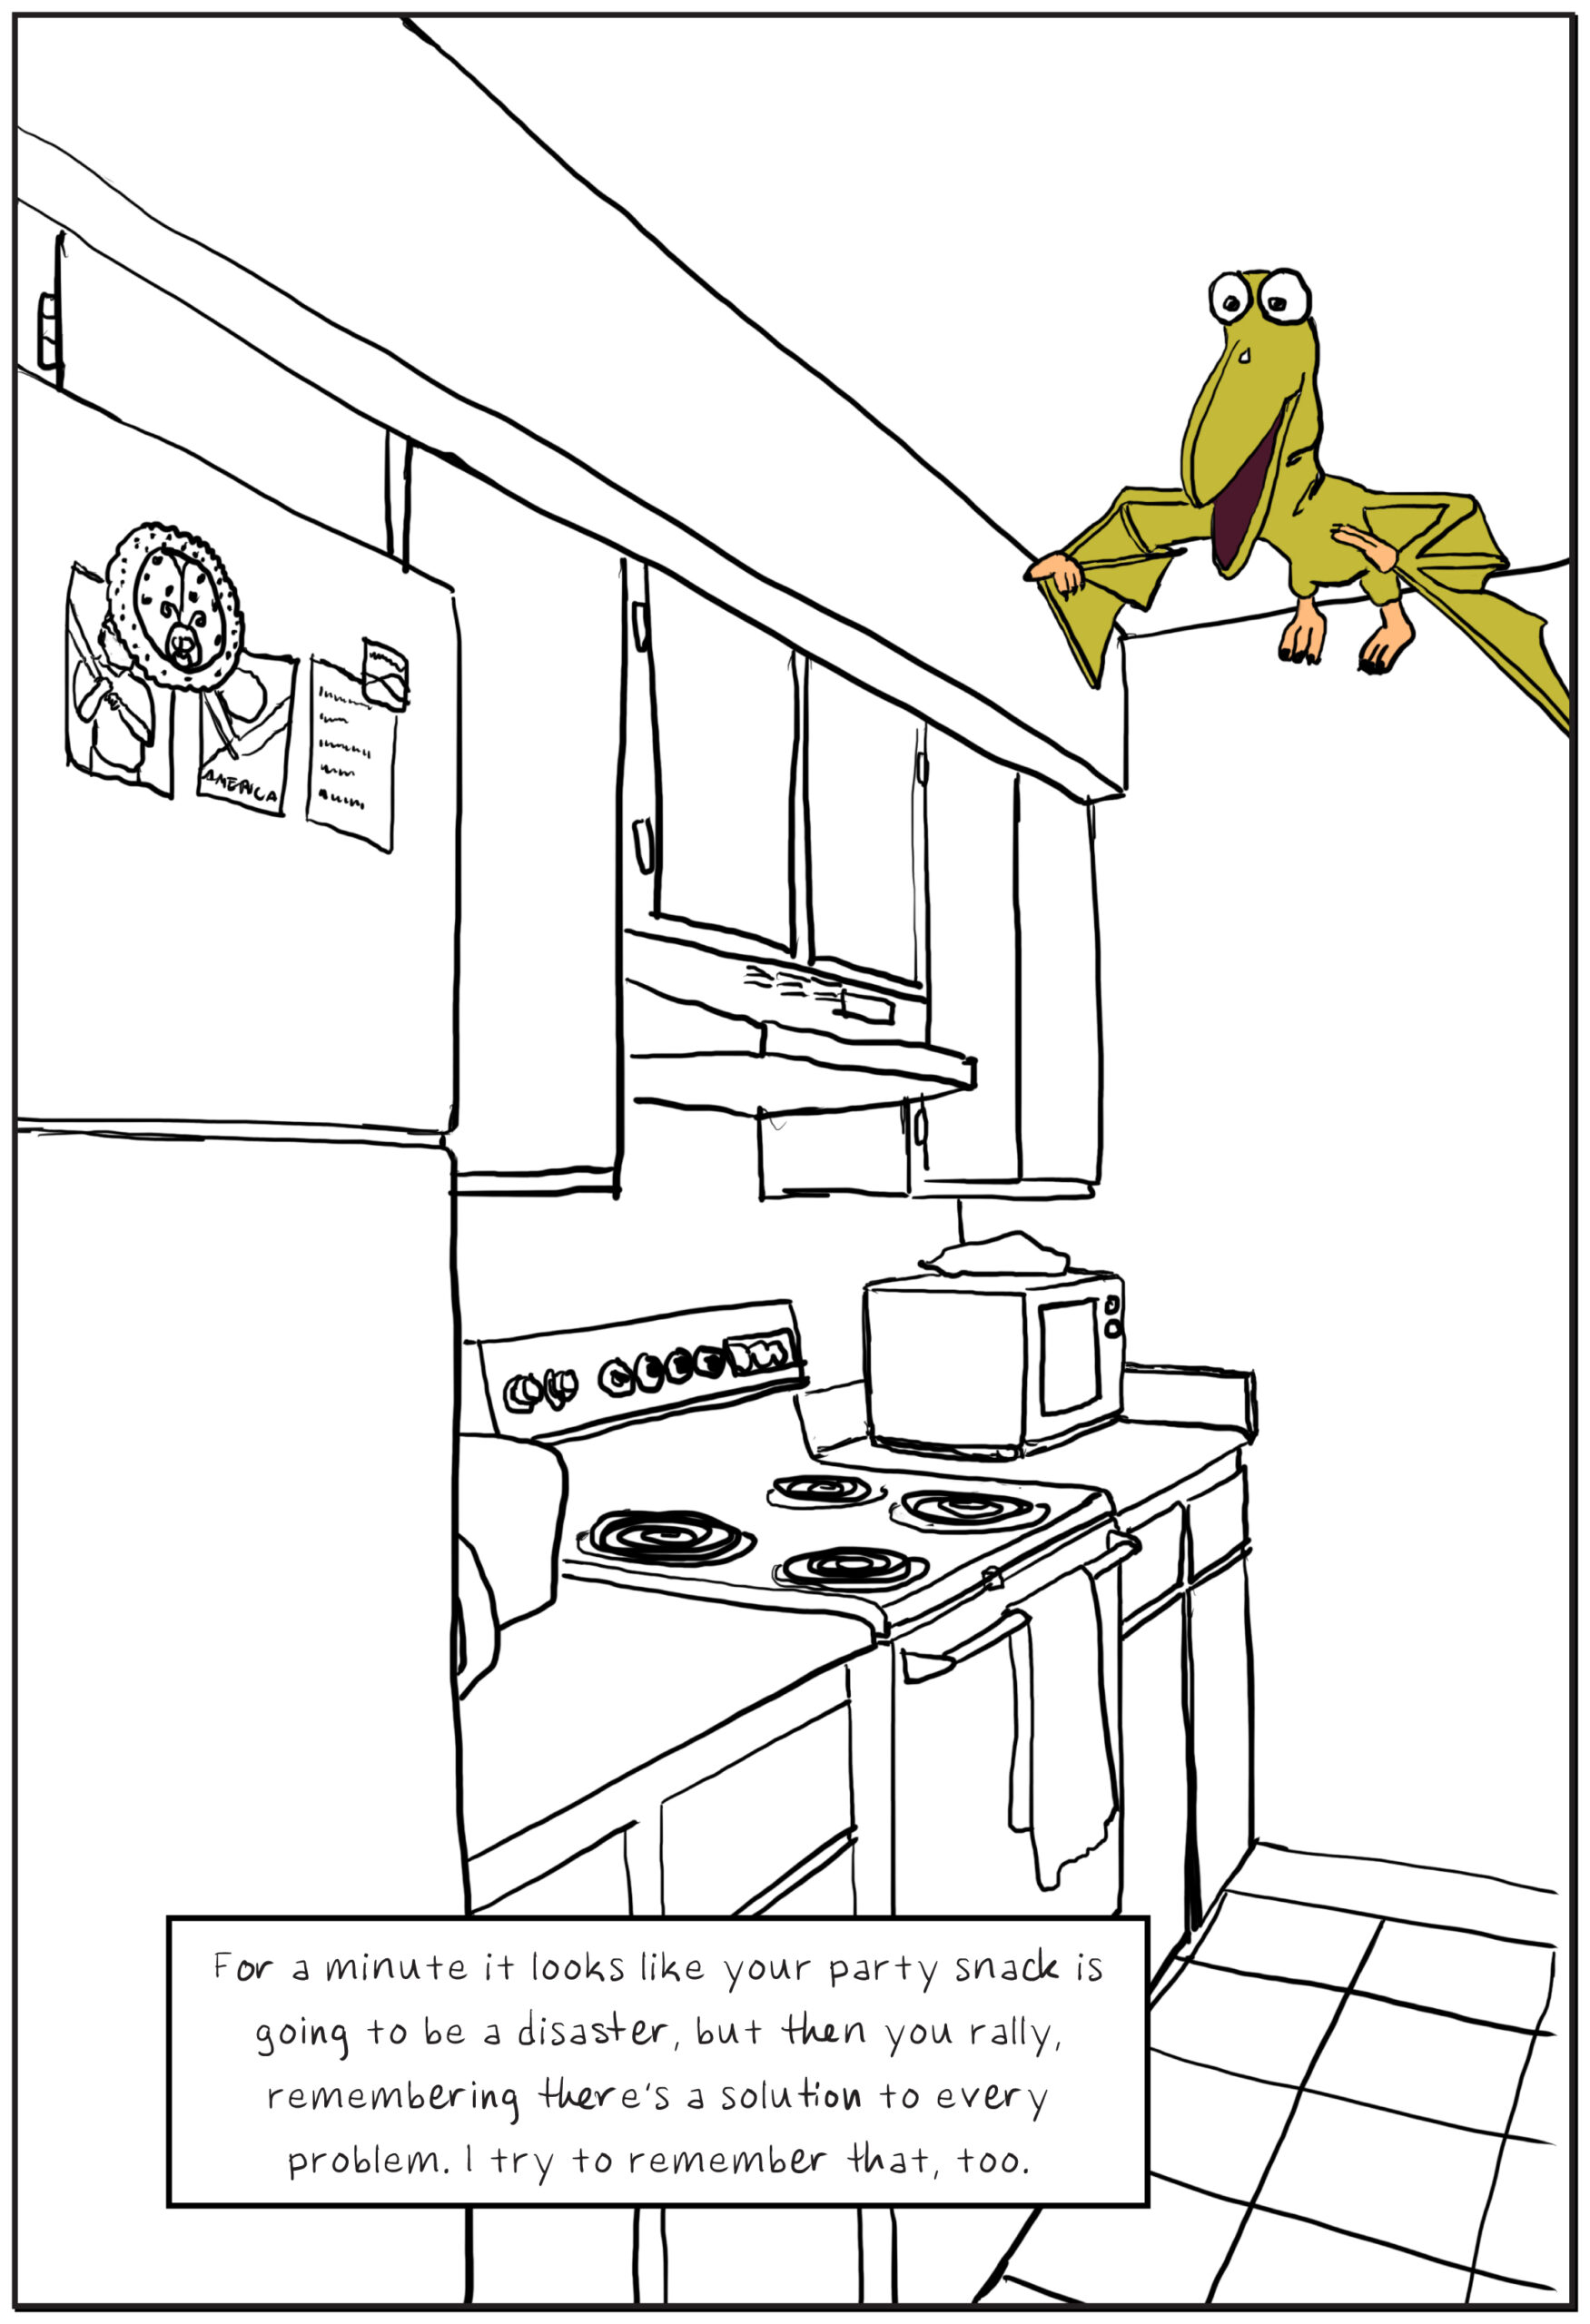 A 1980s kitchen is drawn in black and white. A childlike green pterodactyl is flying near the ceiling. Text: For a minute it looks like your party snack is going to be a disaster, but then you rally, remembering there’s a solution to every problem. I try to remember that, too.